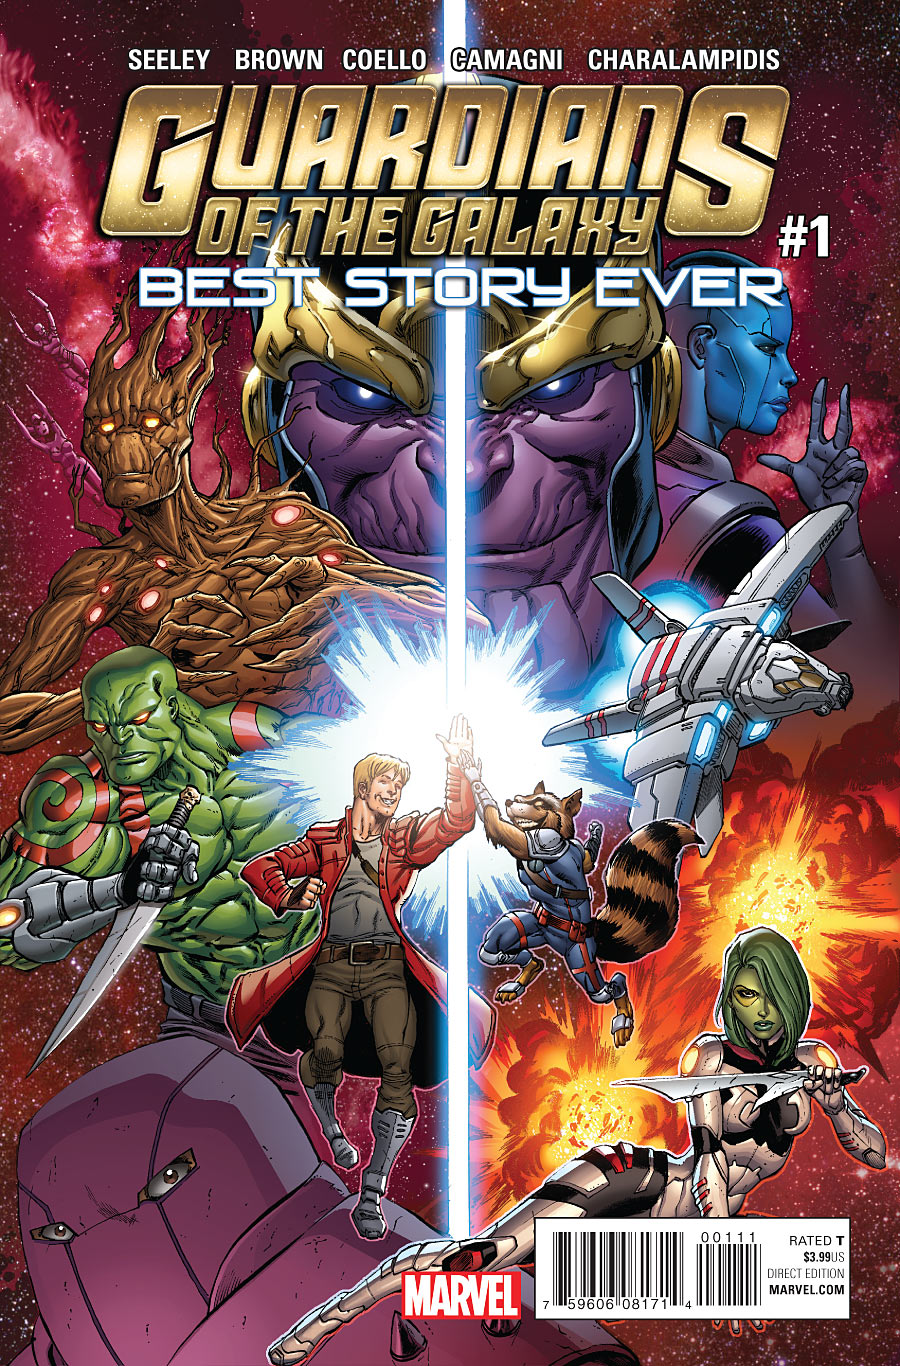 Guardians of the Galaxy: Best Story Ever Vol. 1 #1